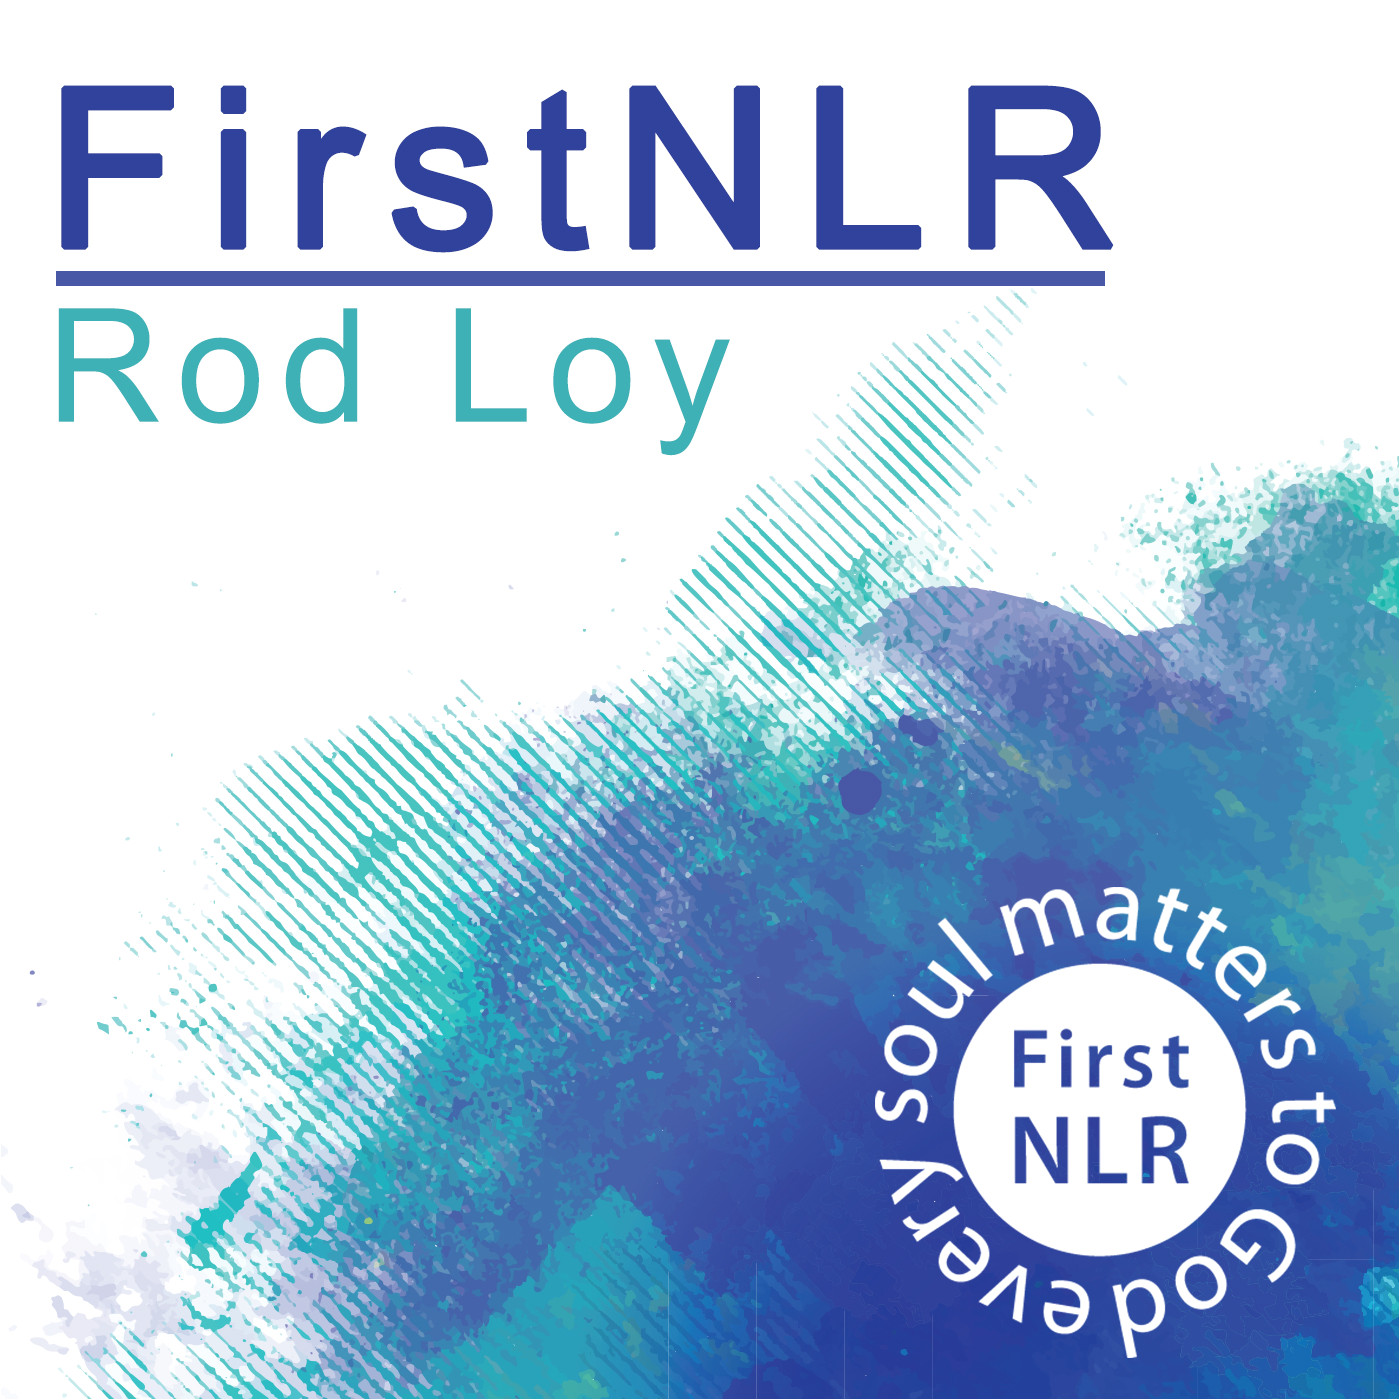 First assembly north Little Rock First assembly Nlr Audio Podcast by Rod Loy On Apple Podcasts